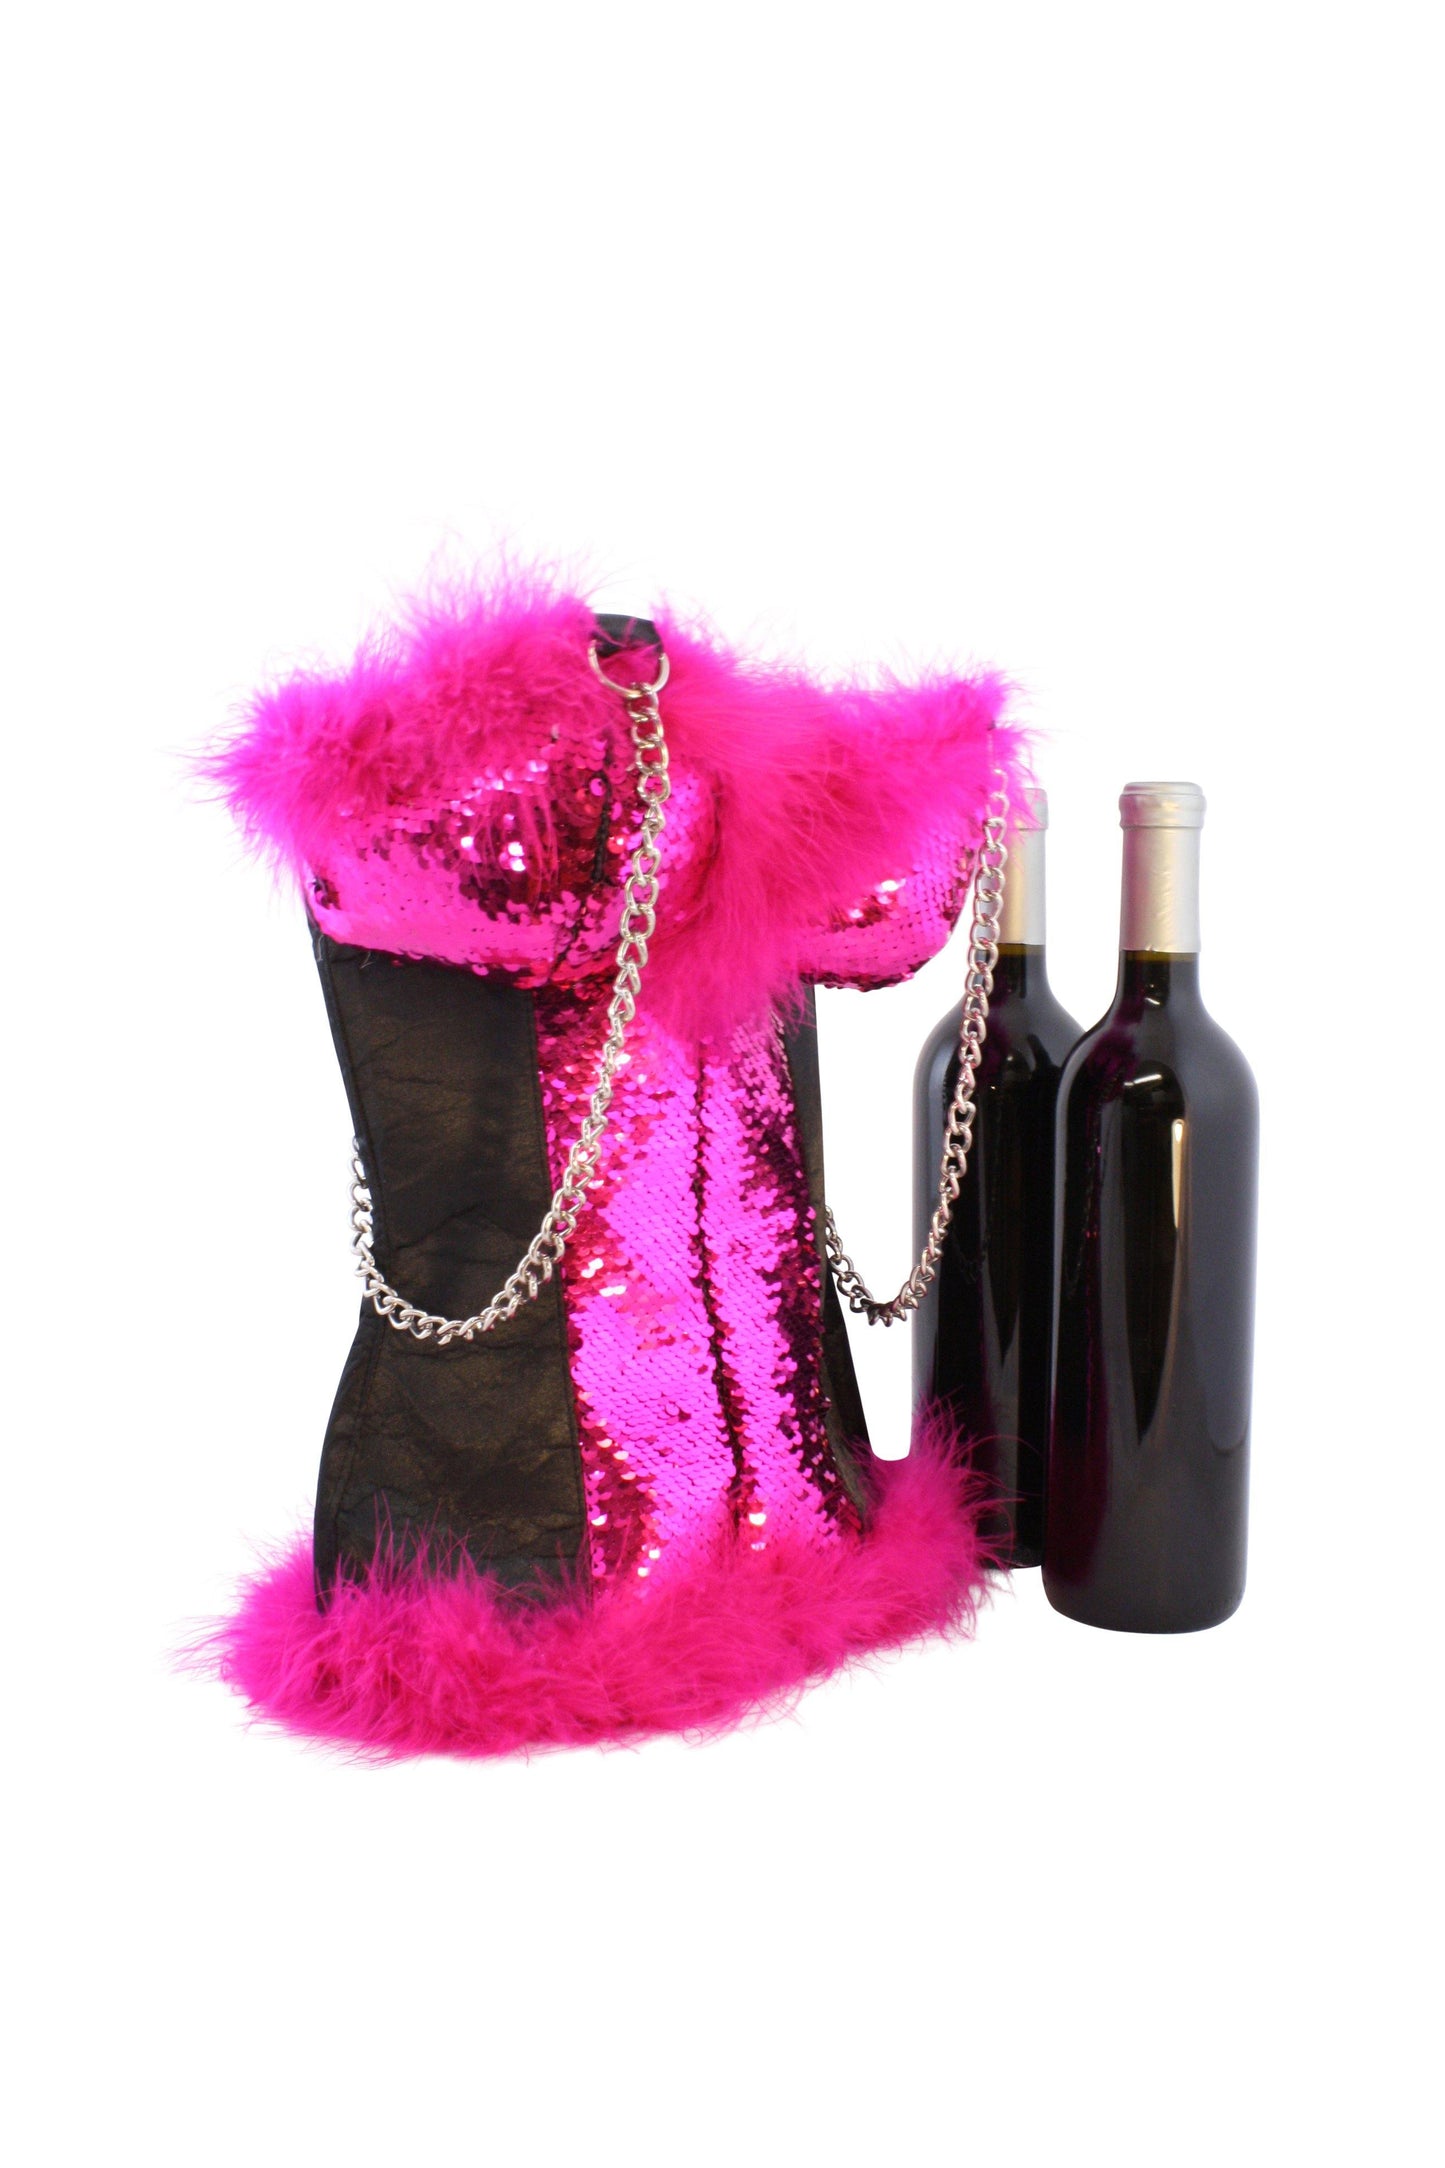 Ultimate Wine Tote by Tipsy Totes - the Corset Wine Bag Holds 2 Bottles